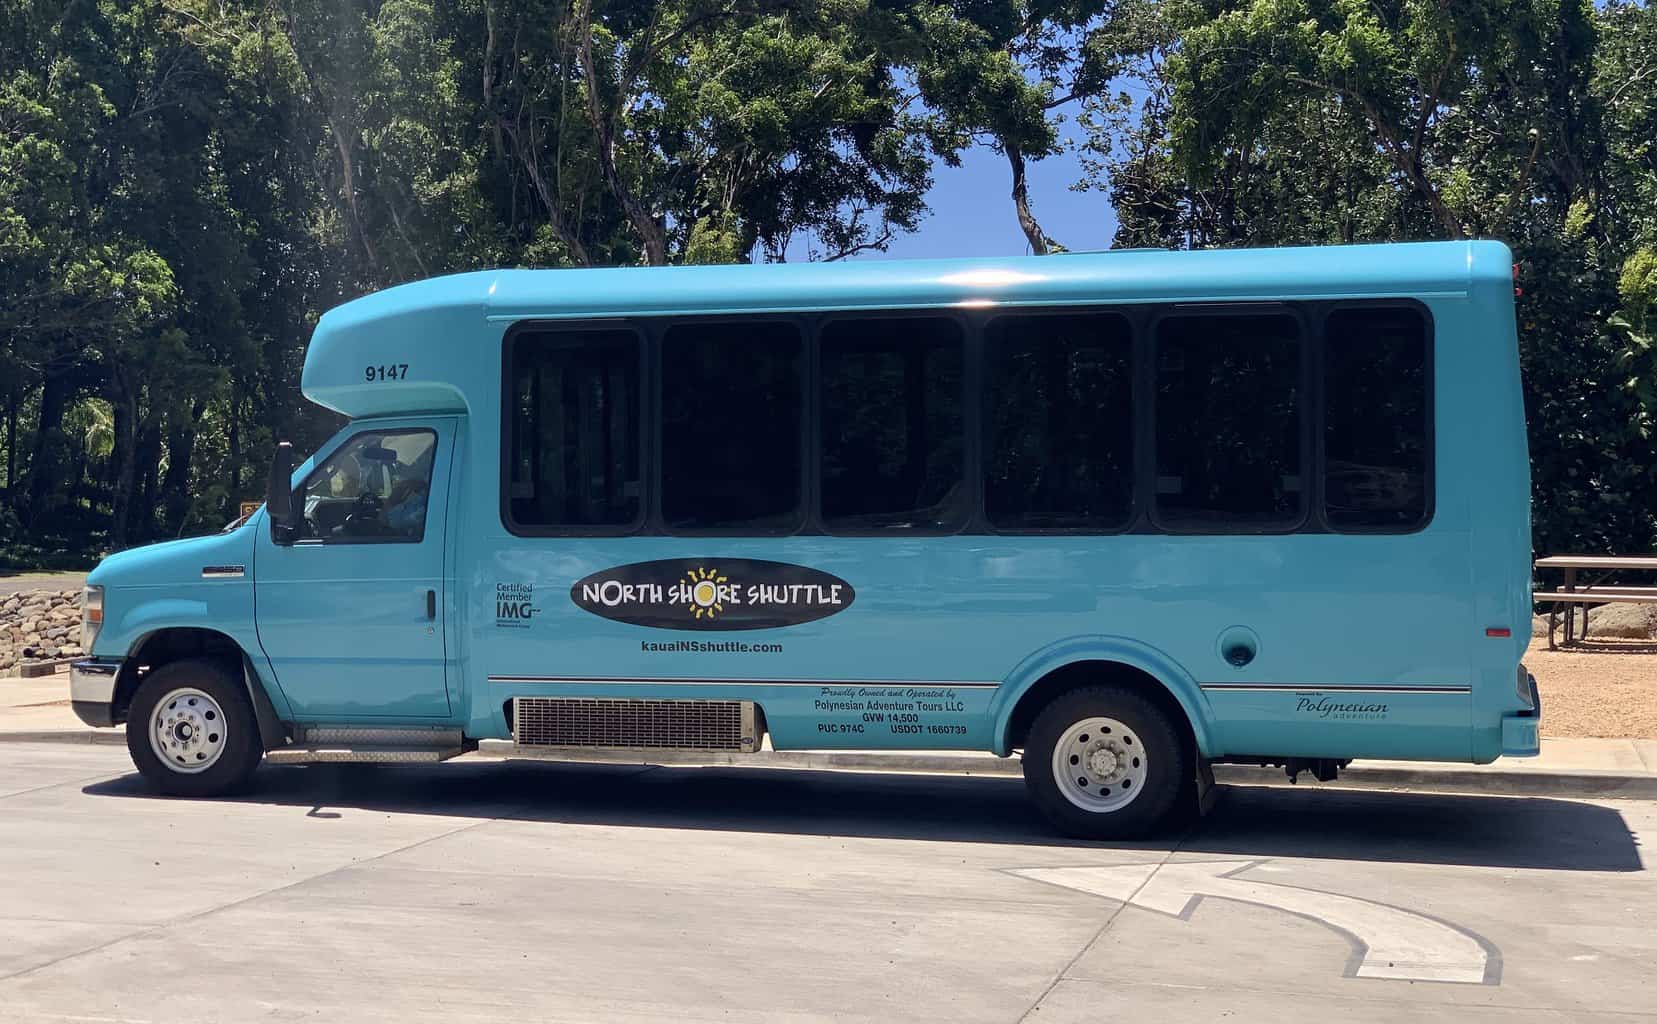 Kauai North Shore Shuttle to Resume Service on July 11th